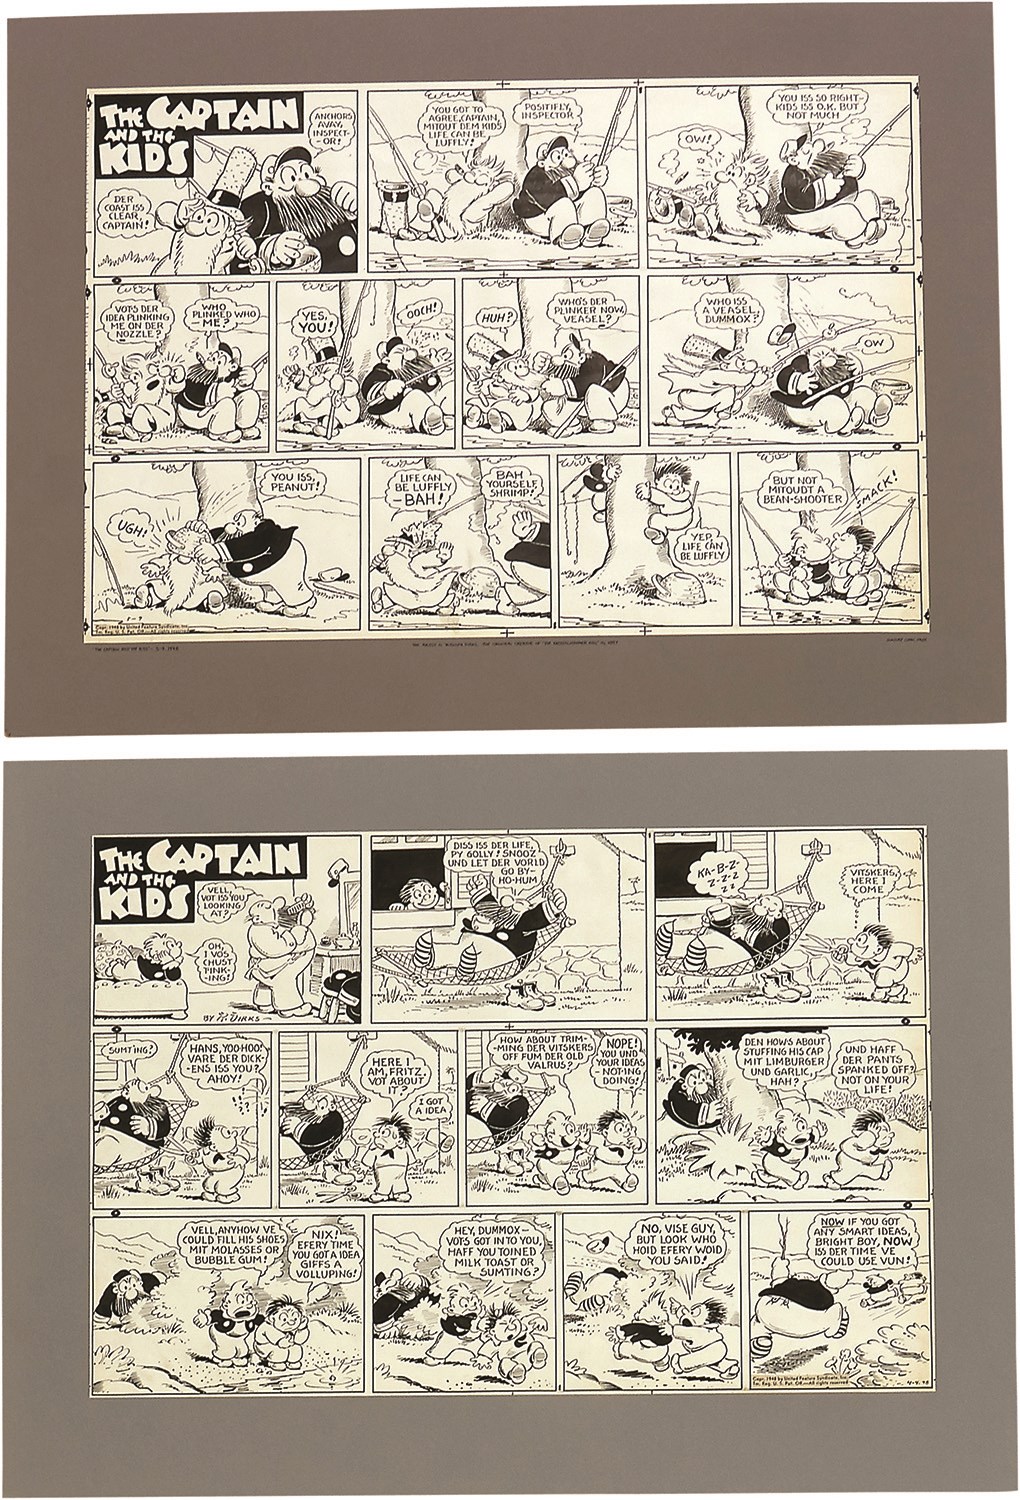 - Two 1948 Captain and the Kids Sunday Page Original Art